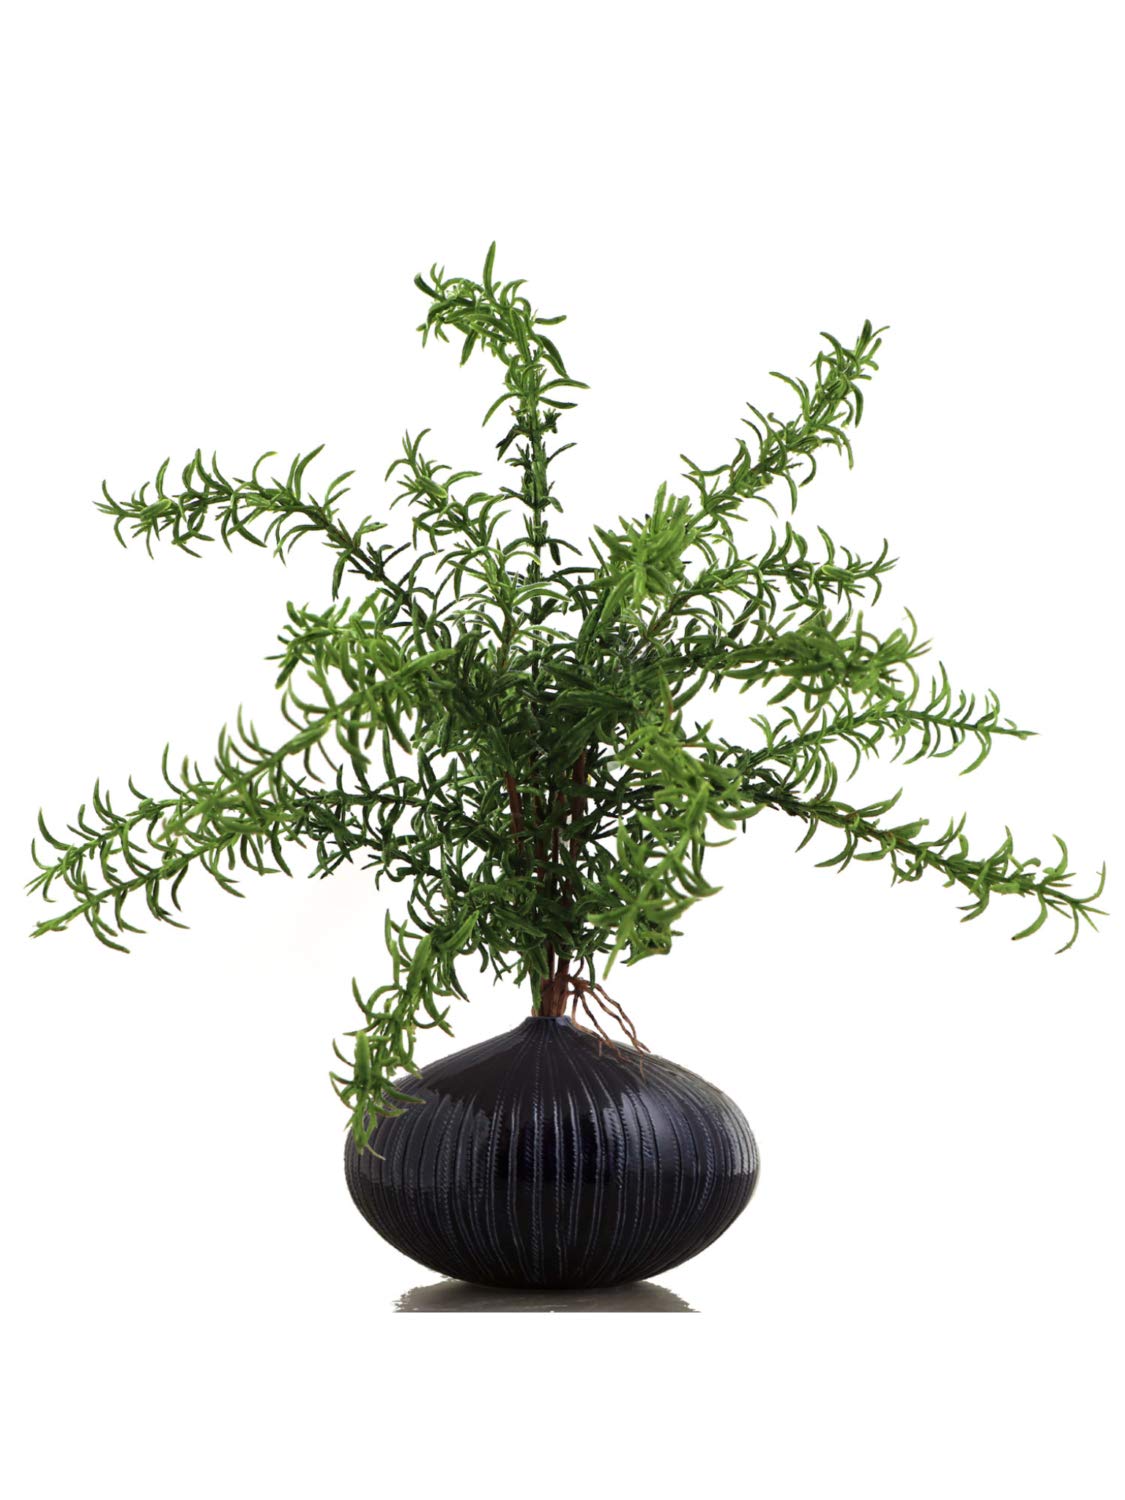 17" Rosemary Bush Set 4/pc: Realistic Faux Greenery for Elegant Home, DIY Wedding Arrangements, Rustic Centerpieces & Spaces